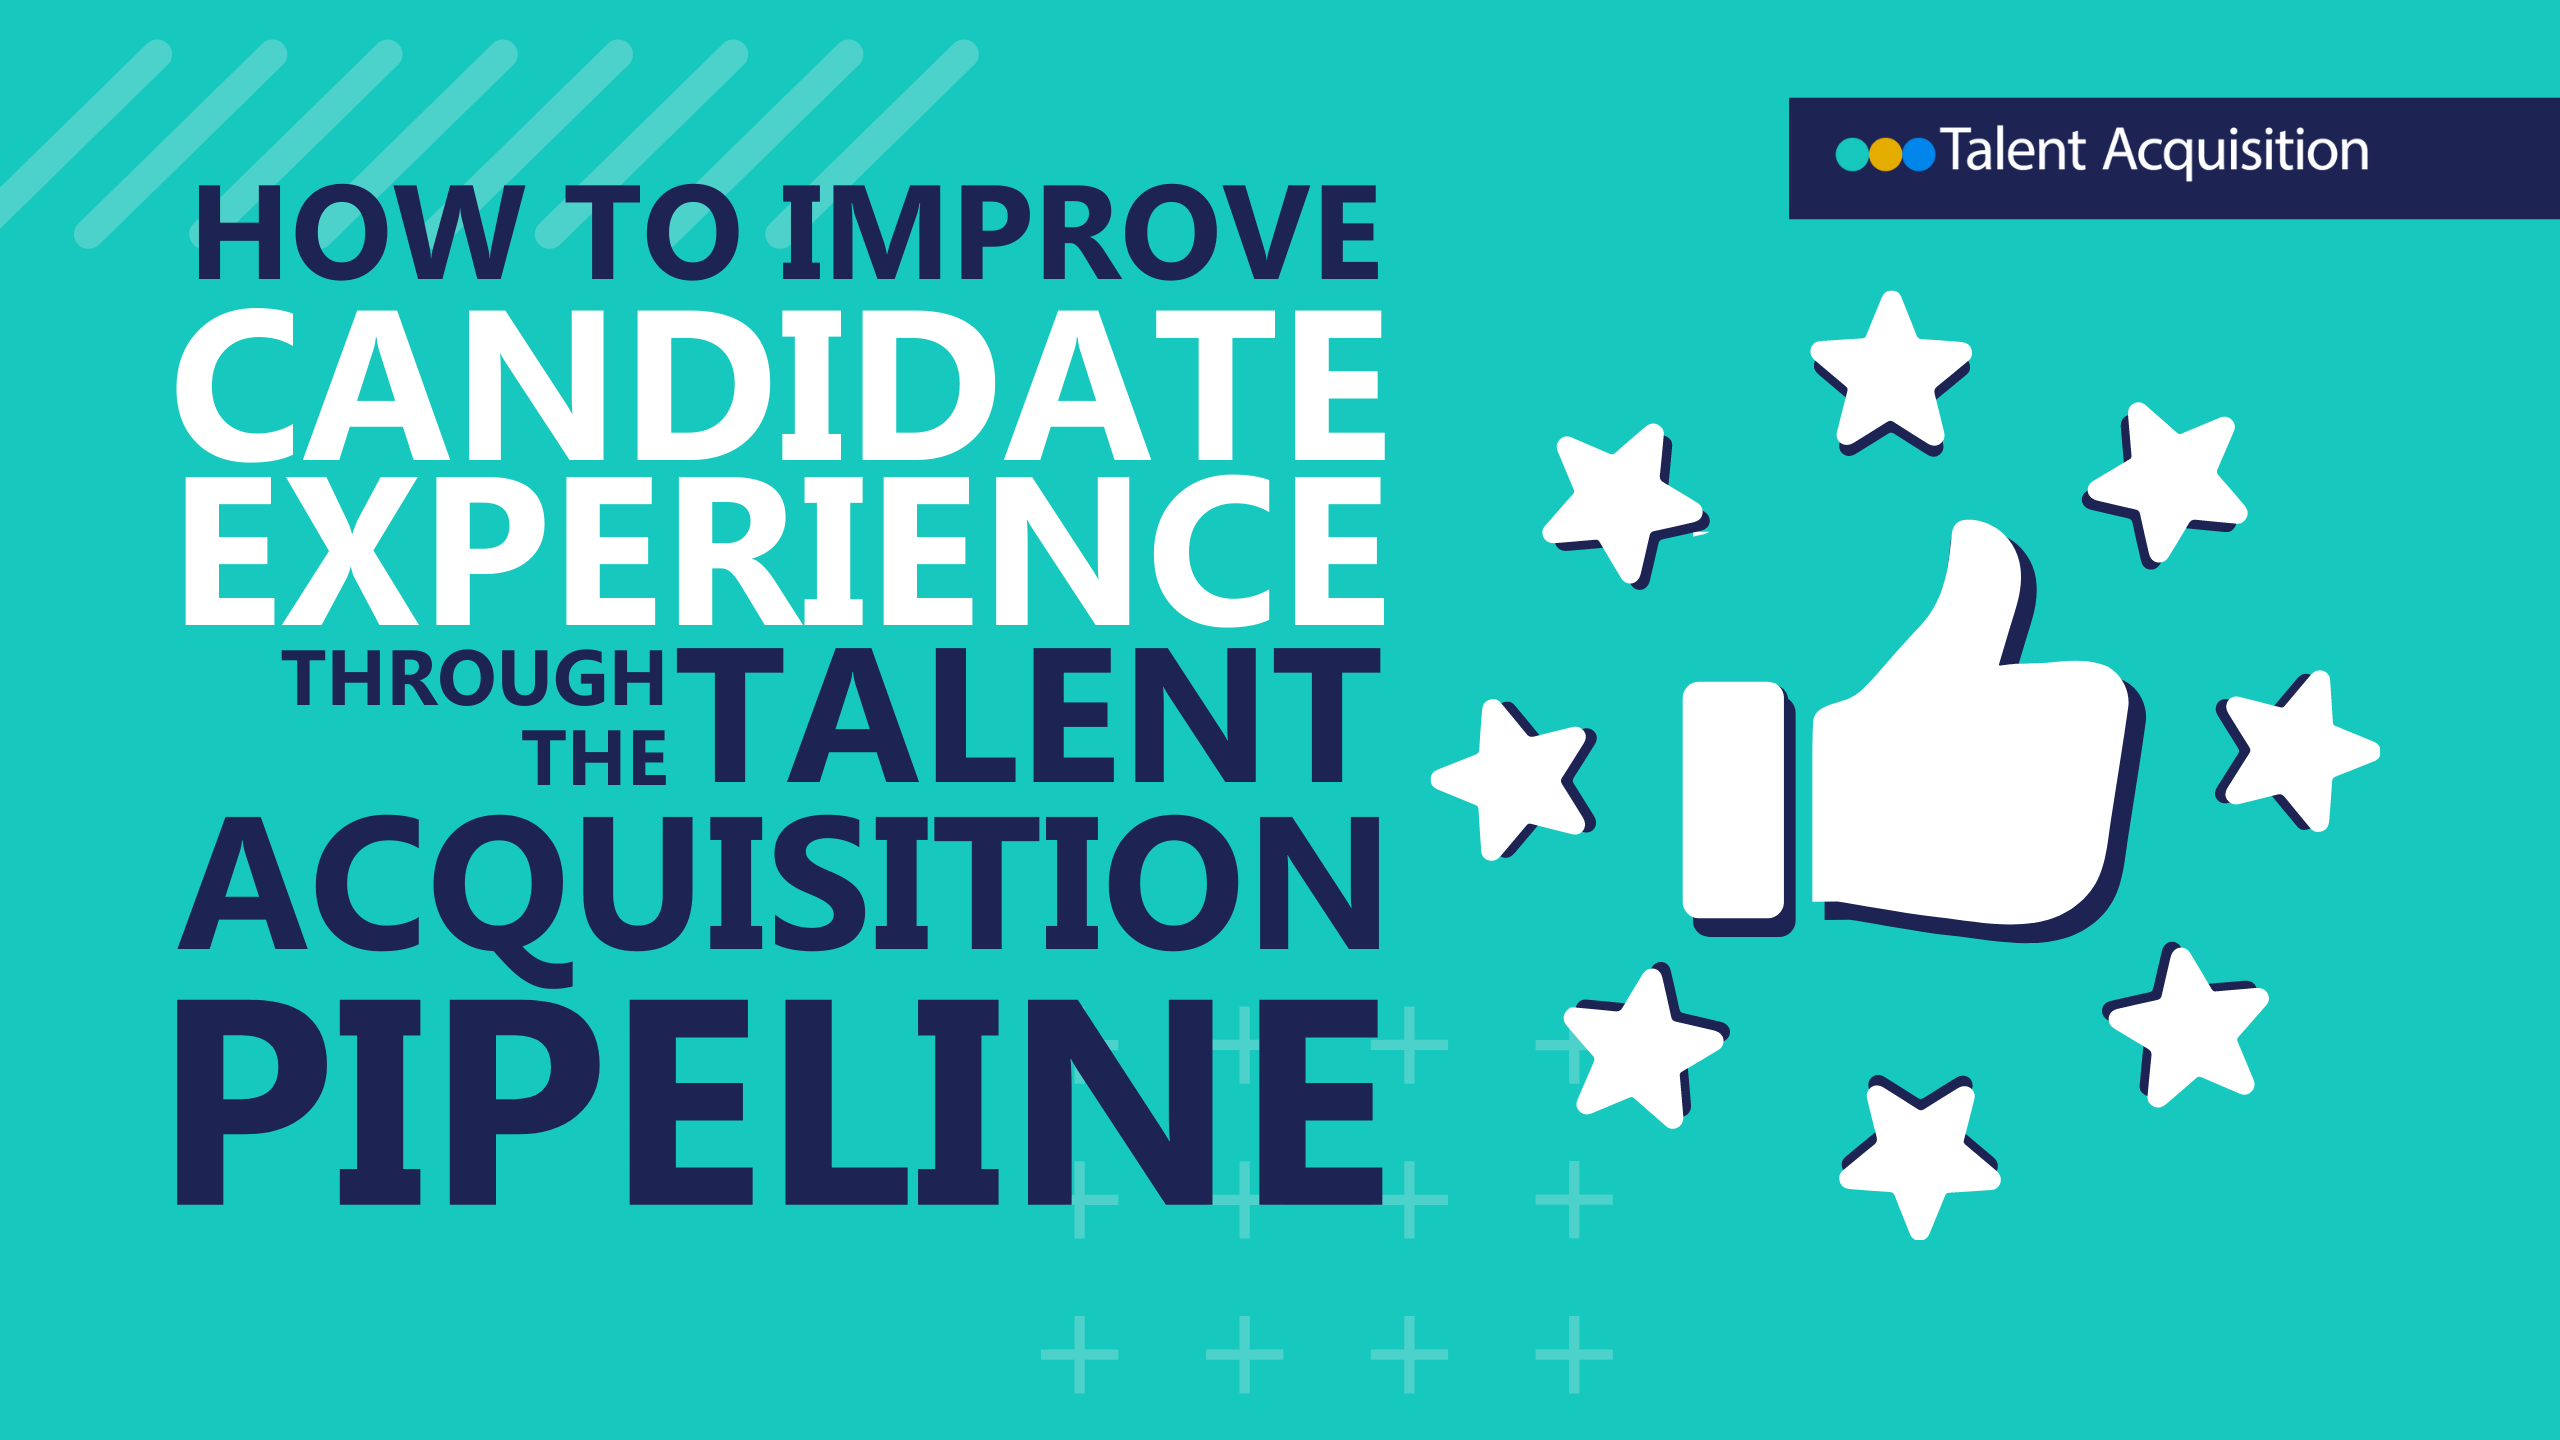 How to Improve Candidate Experience through the Talent Acquisition Pipeline